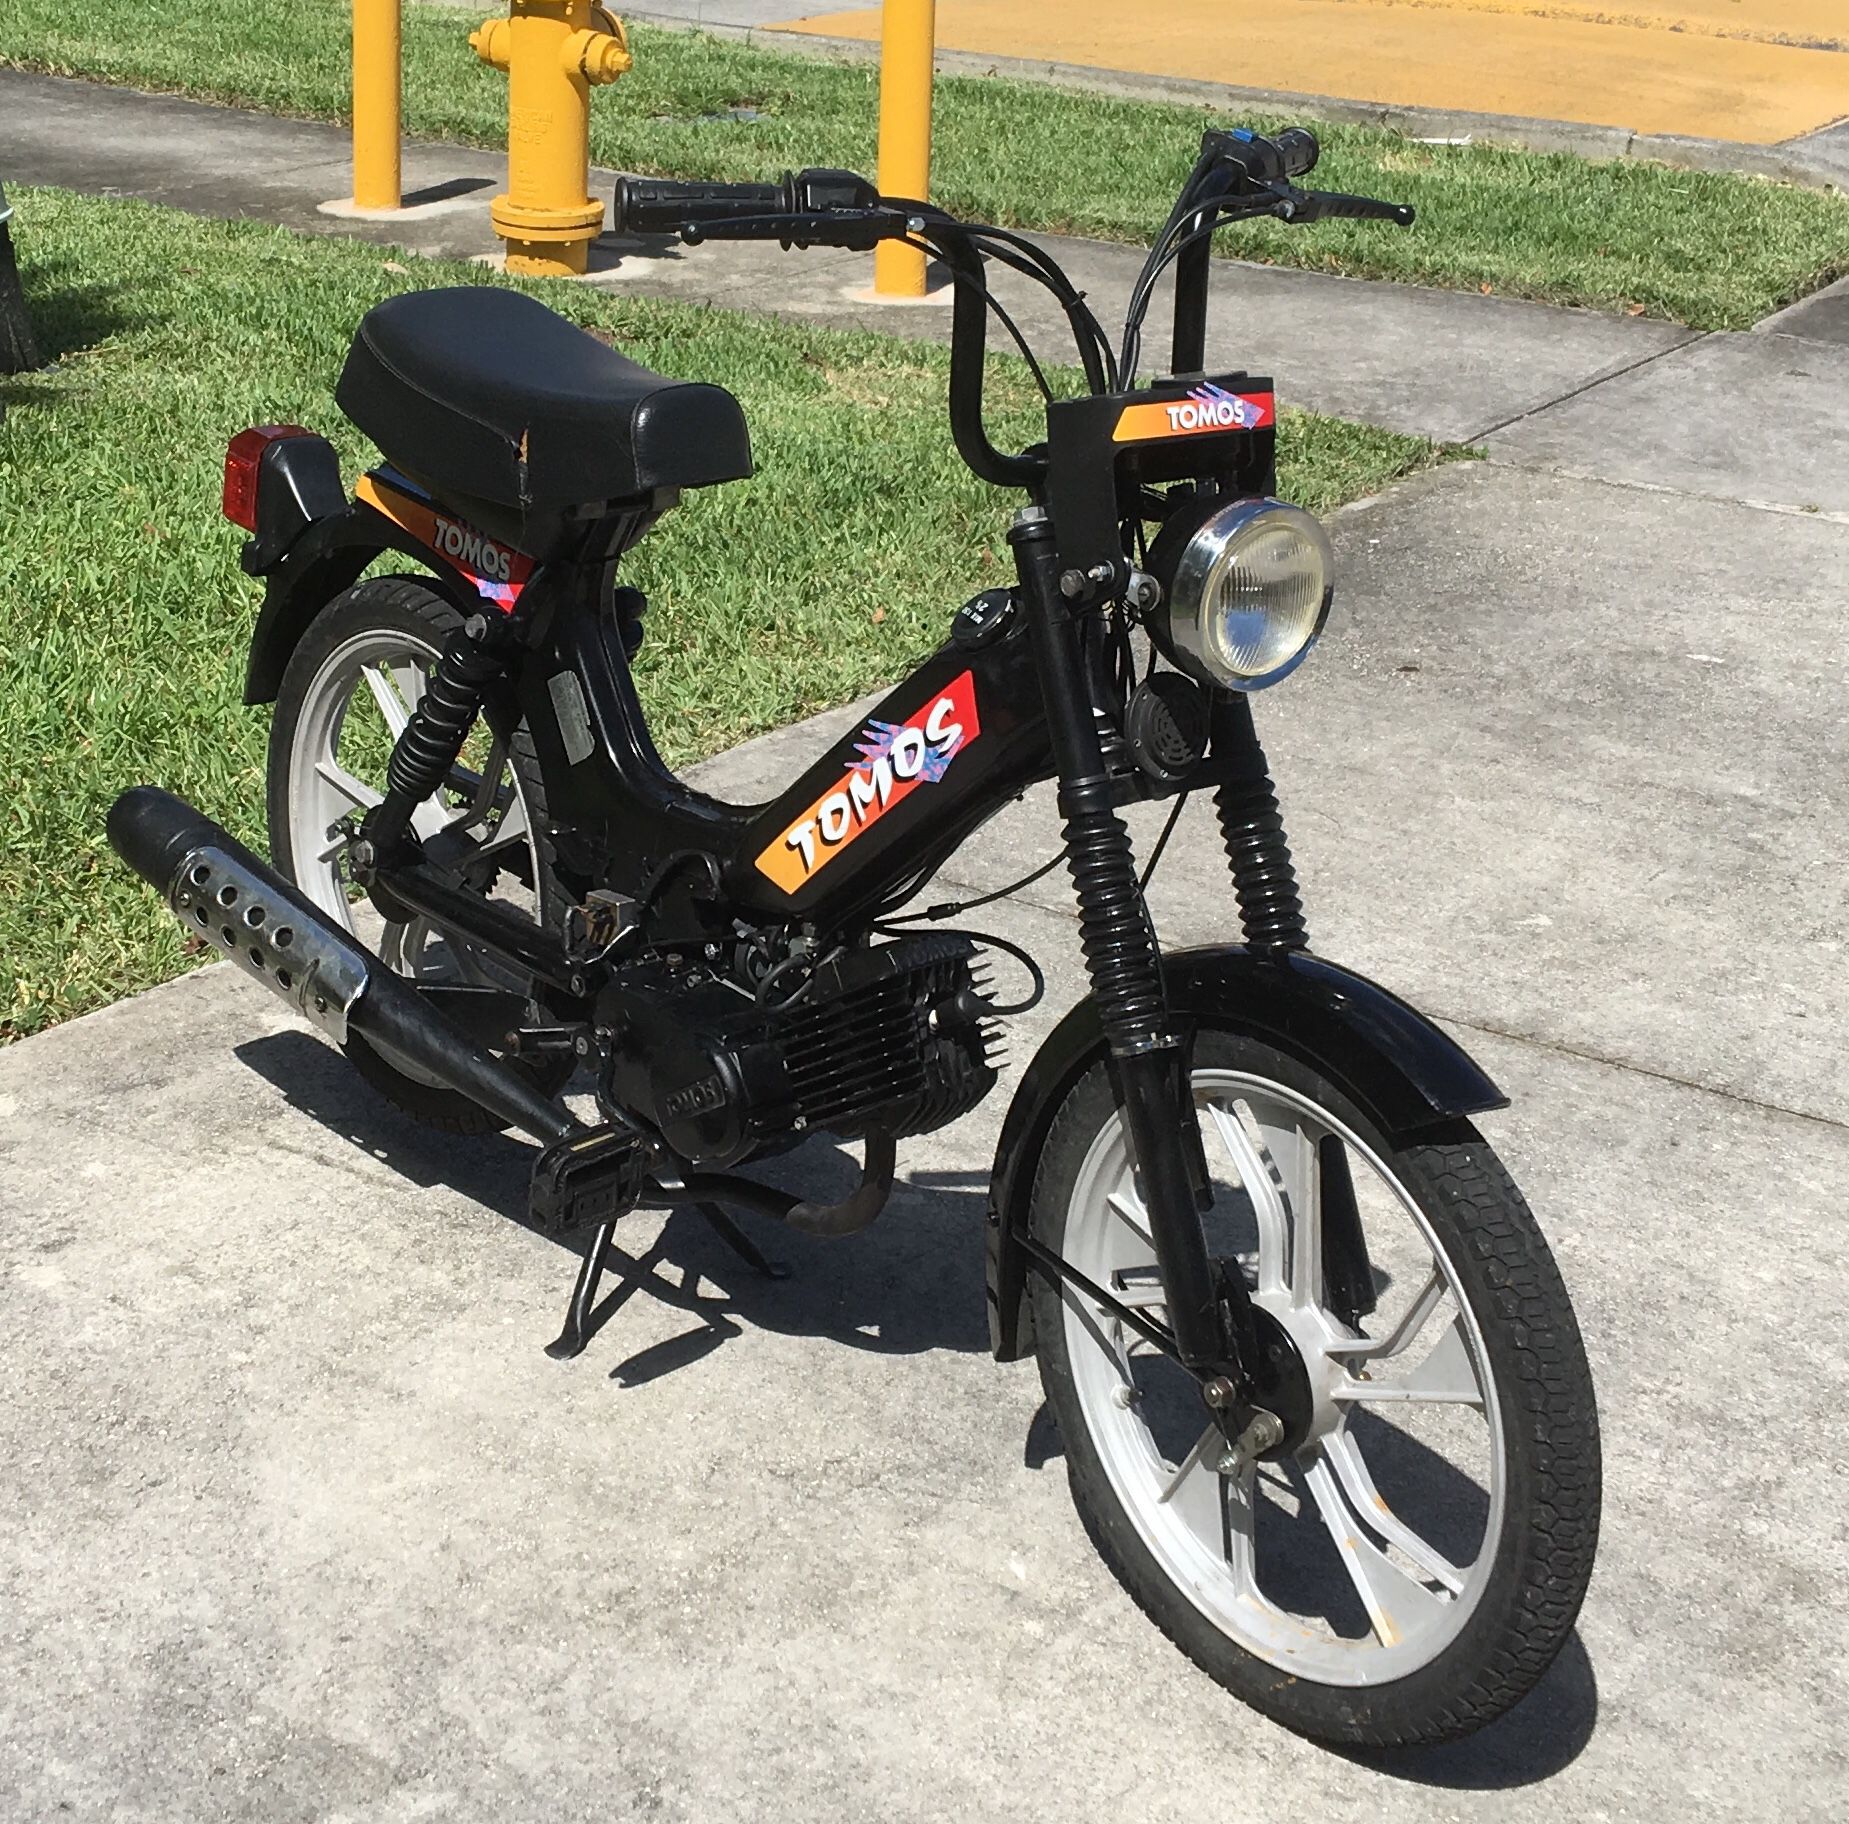 Tomos 50cc moped for Sale FL OfferUp